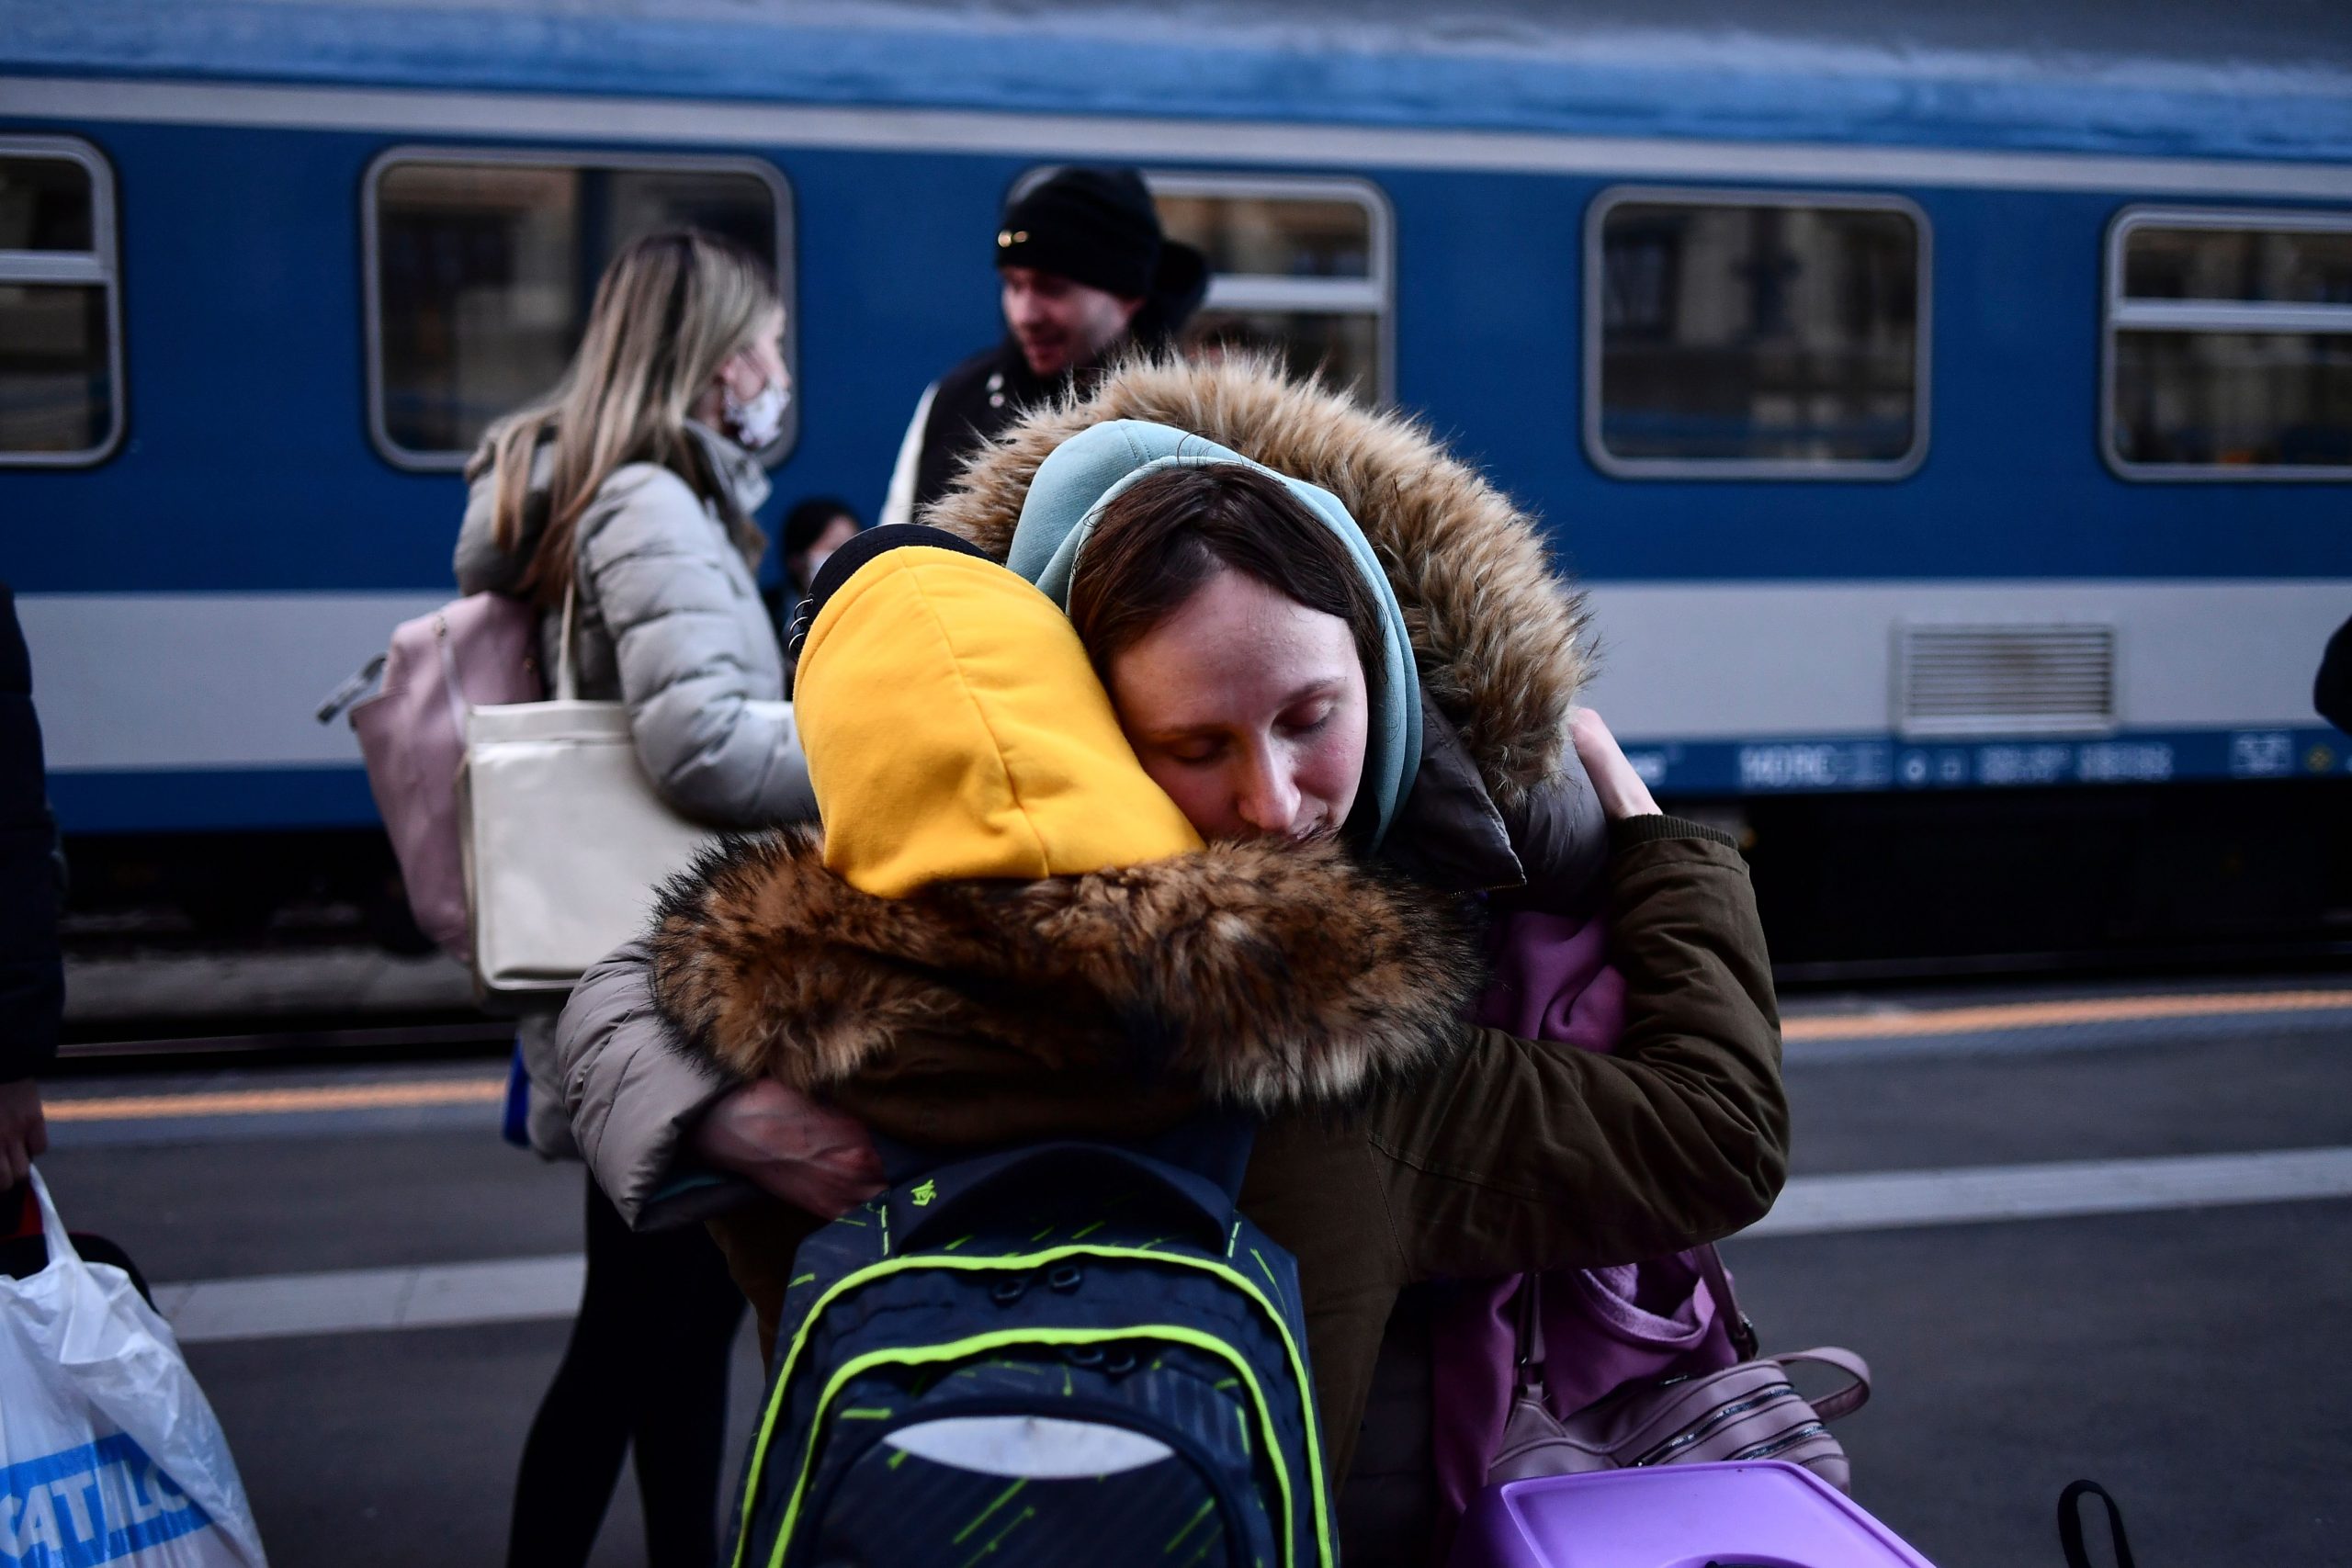 Over 520,000 refugees have fled Ukraine since Russia waged war